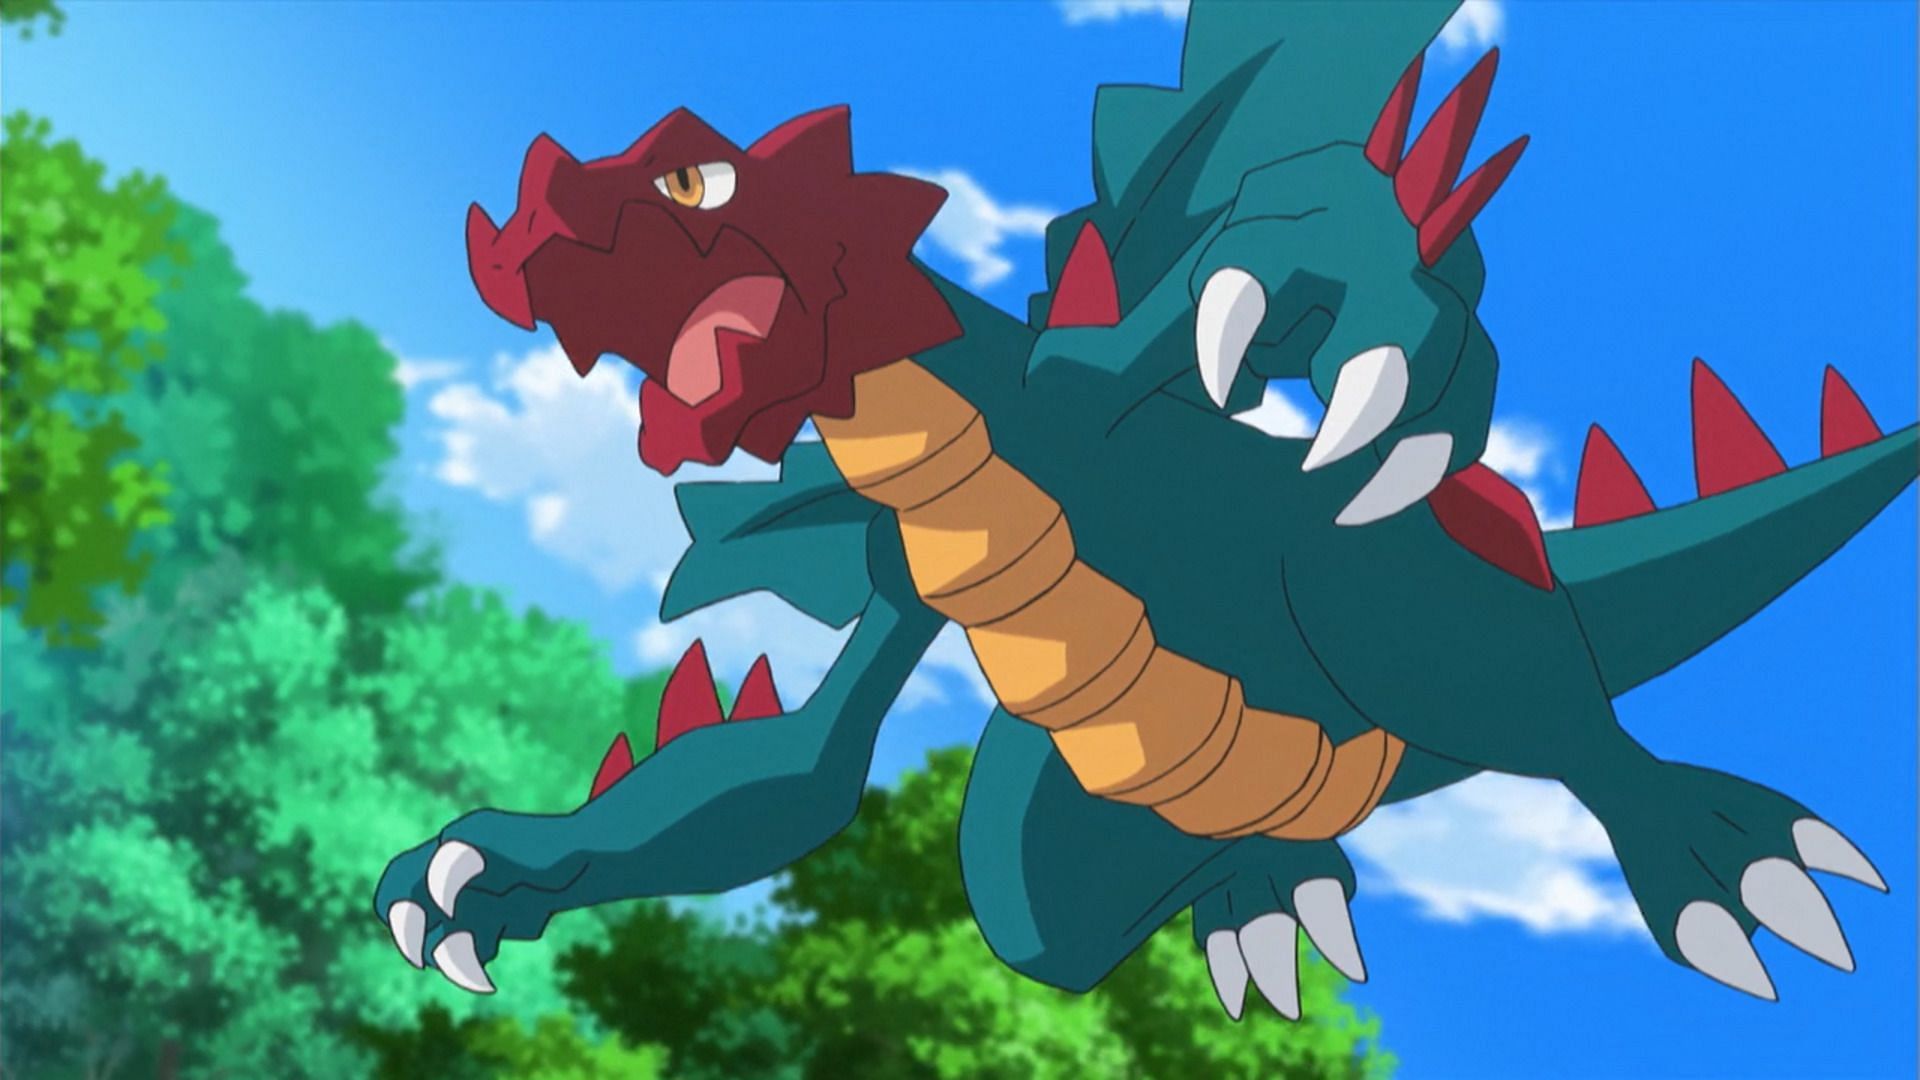 Druddigon as it appears in the anime (Image via The Pokemon Company)